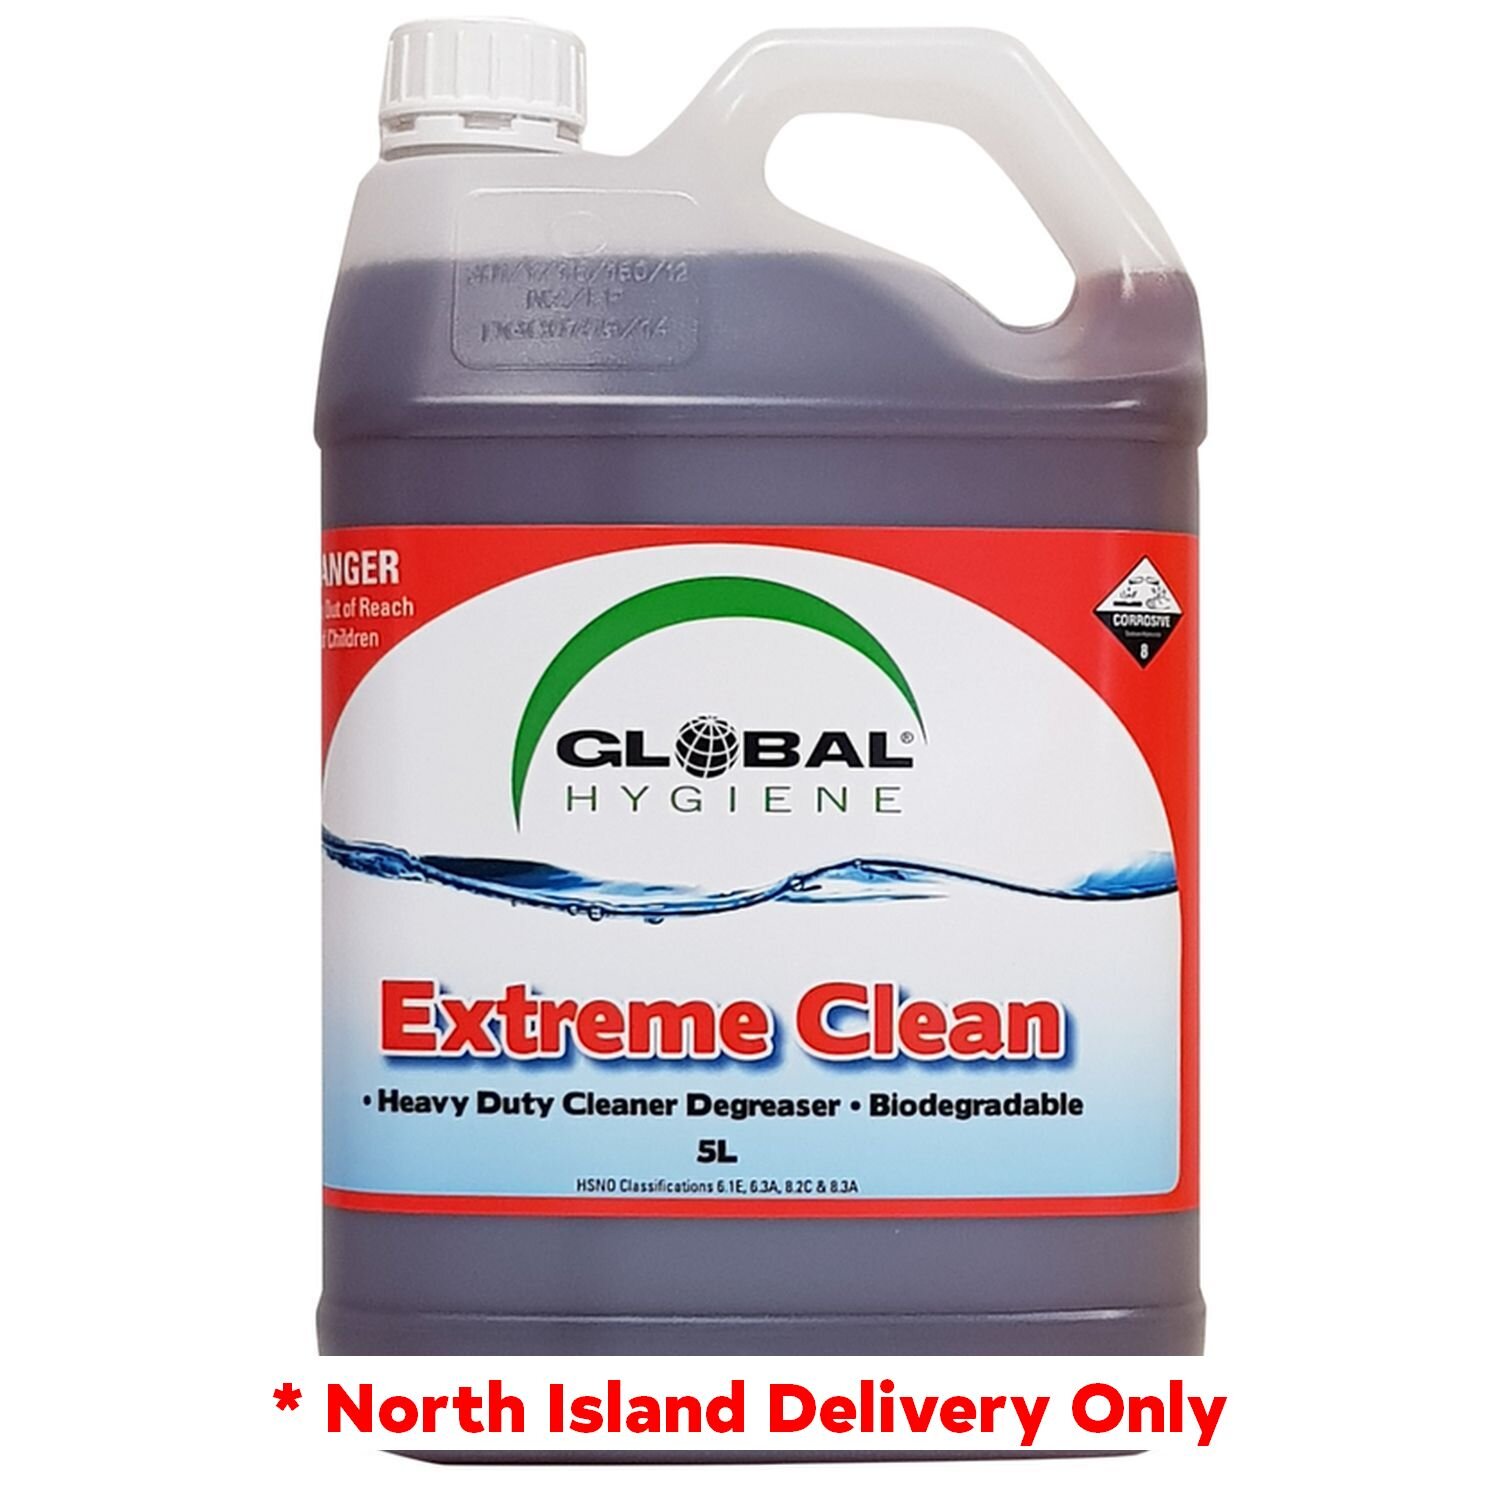 Global Extreme Clean Heavy Duty Degreaser